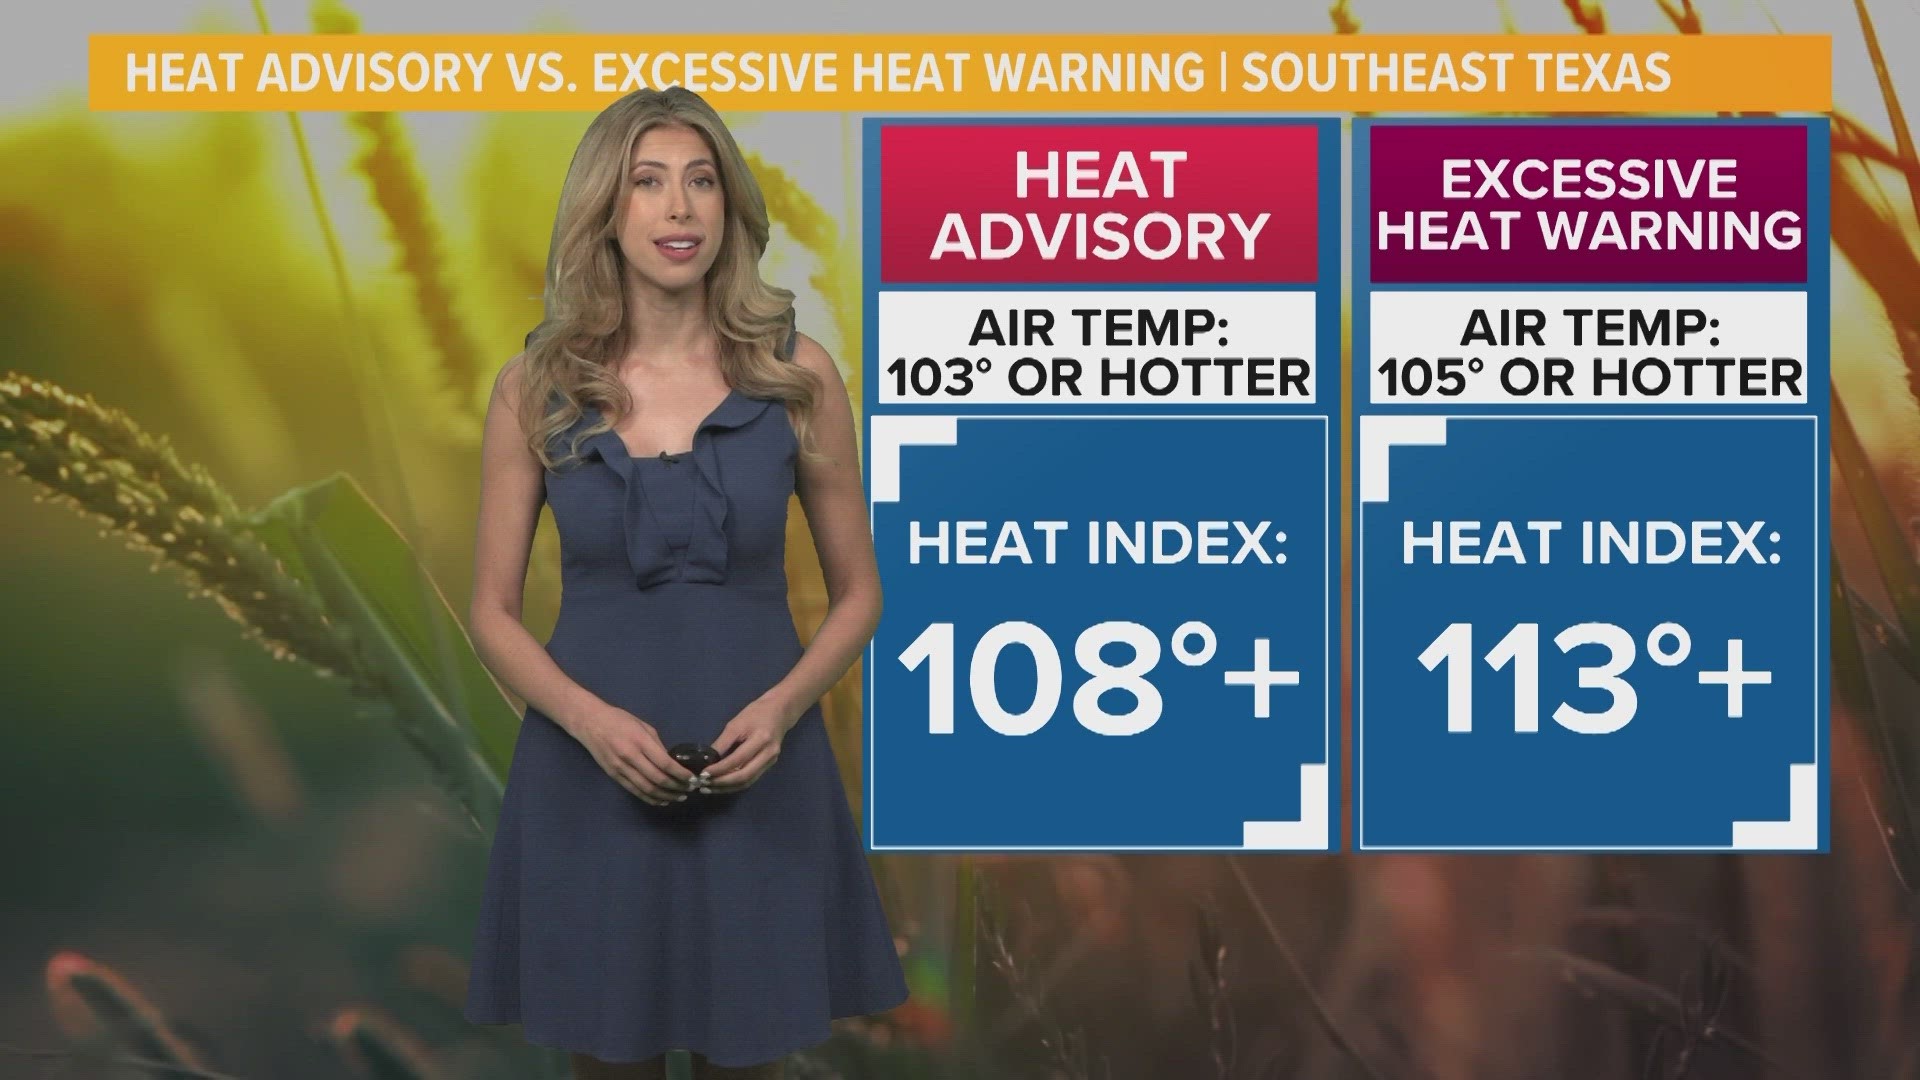 Here is what you need to know about the different kinds of heat warnings issued by the National Weather Service.